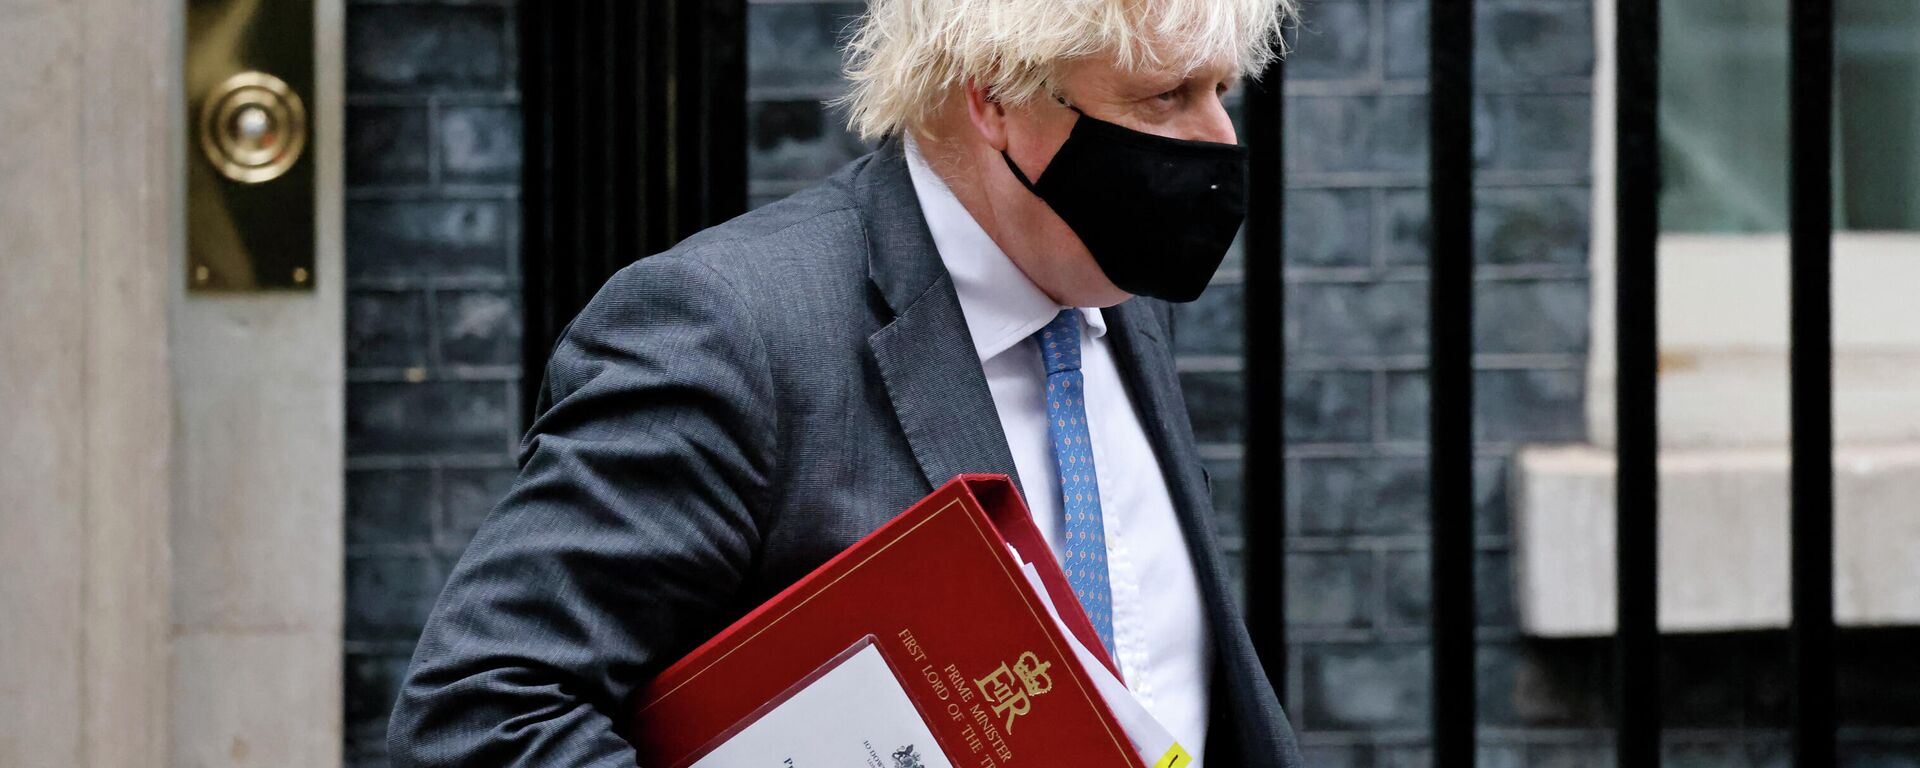 Britain's Prime Minister Boris Johnson, wearing a face covering to stop the spread of coronavirus, carries his notes in a ministerial folder as he leaves from 10 Downing Street in central London on December 15, 2021, to take part in the weekly session of Prime Minister Questions (PMQs) at the House of Commons - Sputnik International, 1920, 16.01.2022